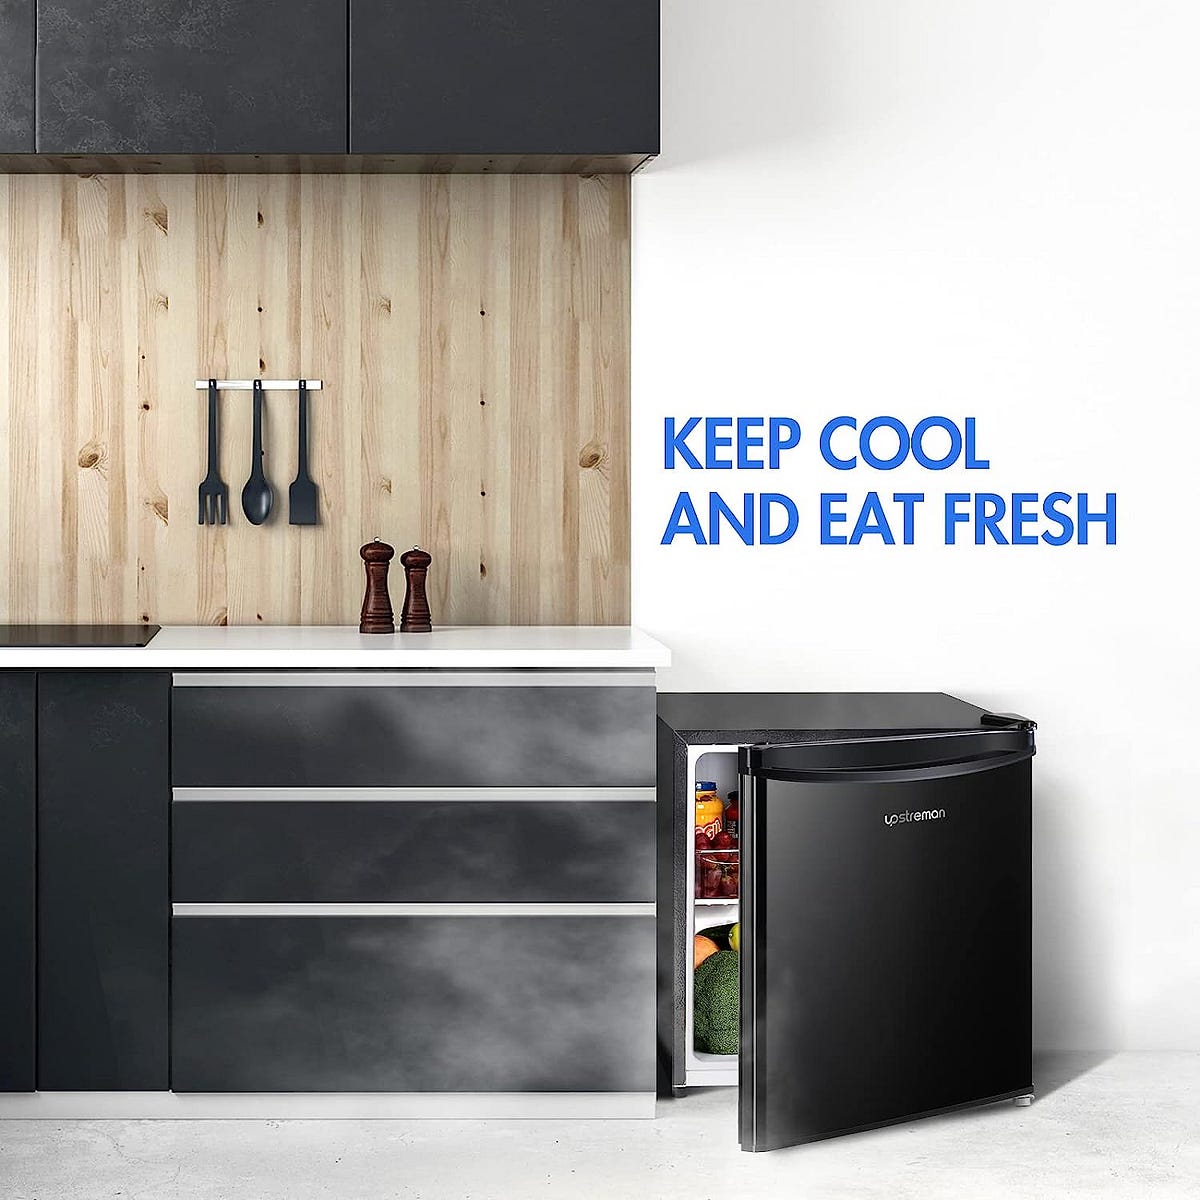 Best Ranking Mini Fridges To Buy Right Now!, by Niko King